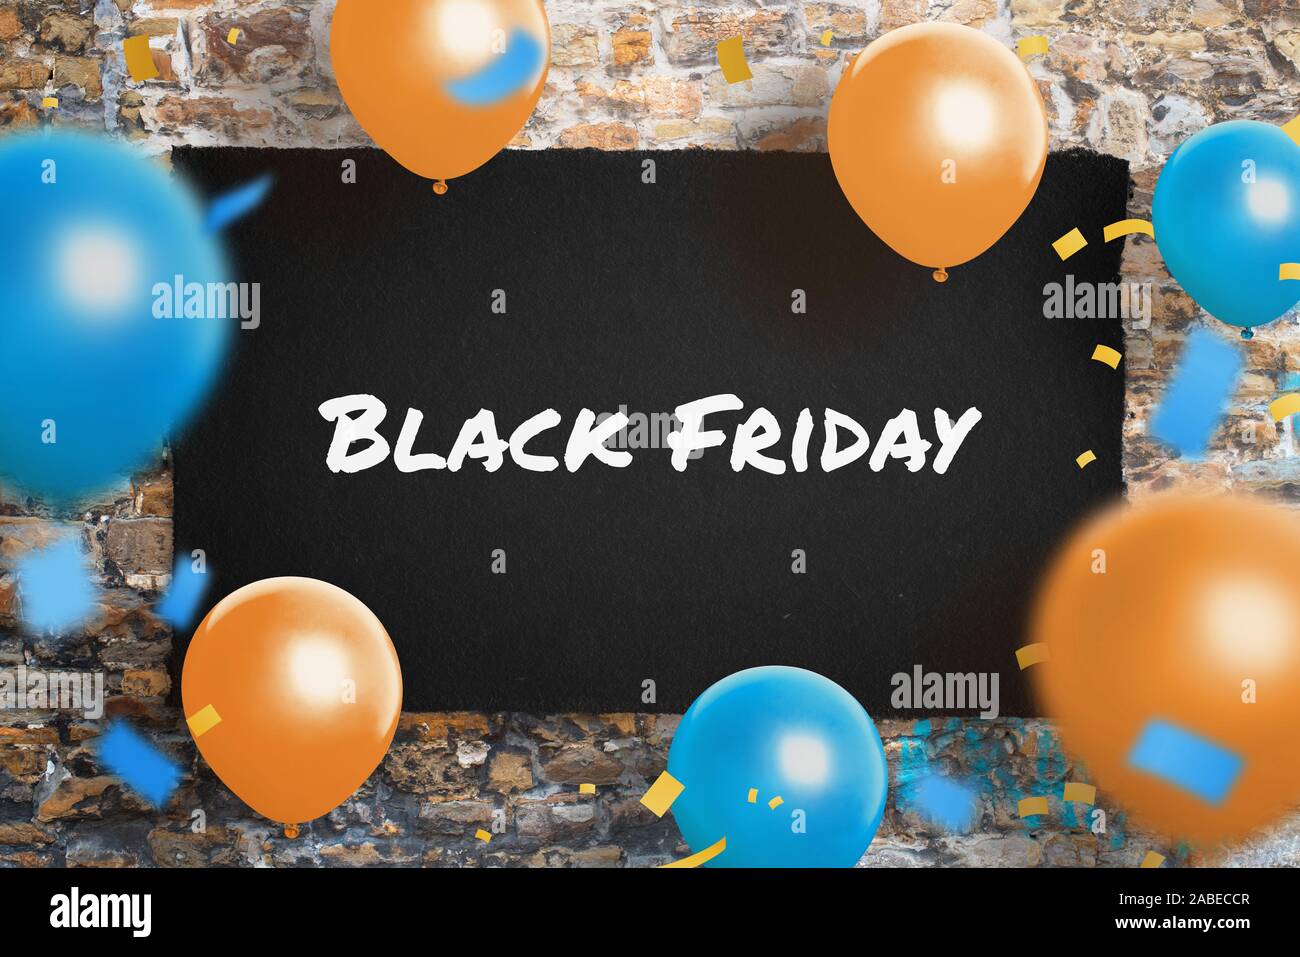 Black Friday poster on wall surrounded with ballons and confetty. Concept of shopping holiday promotion. Stock Photo